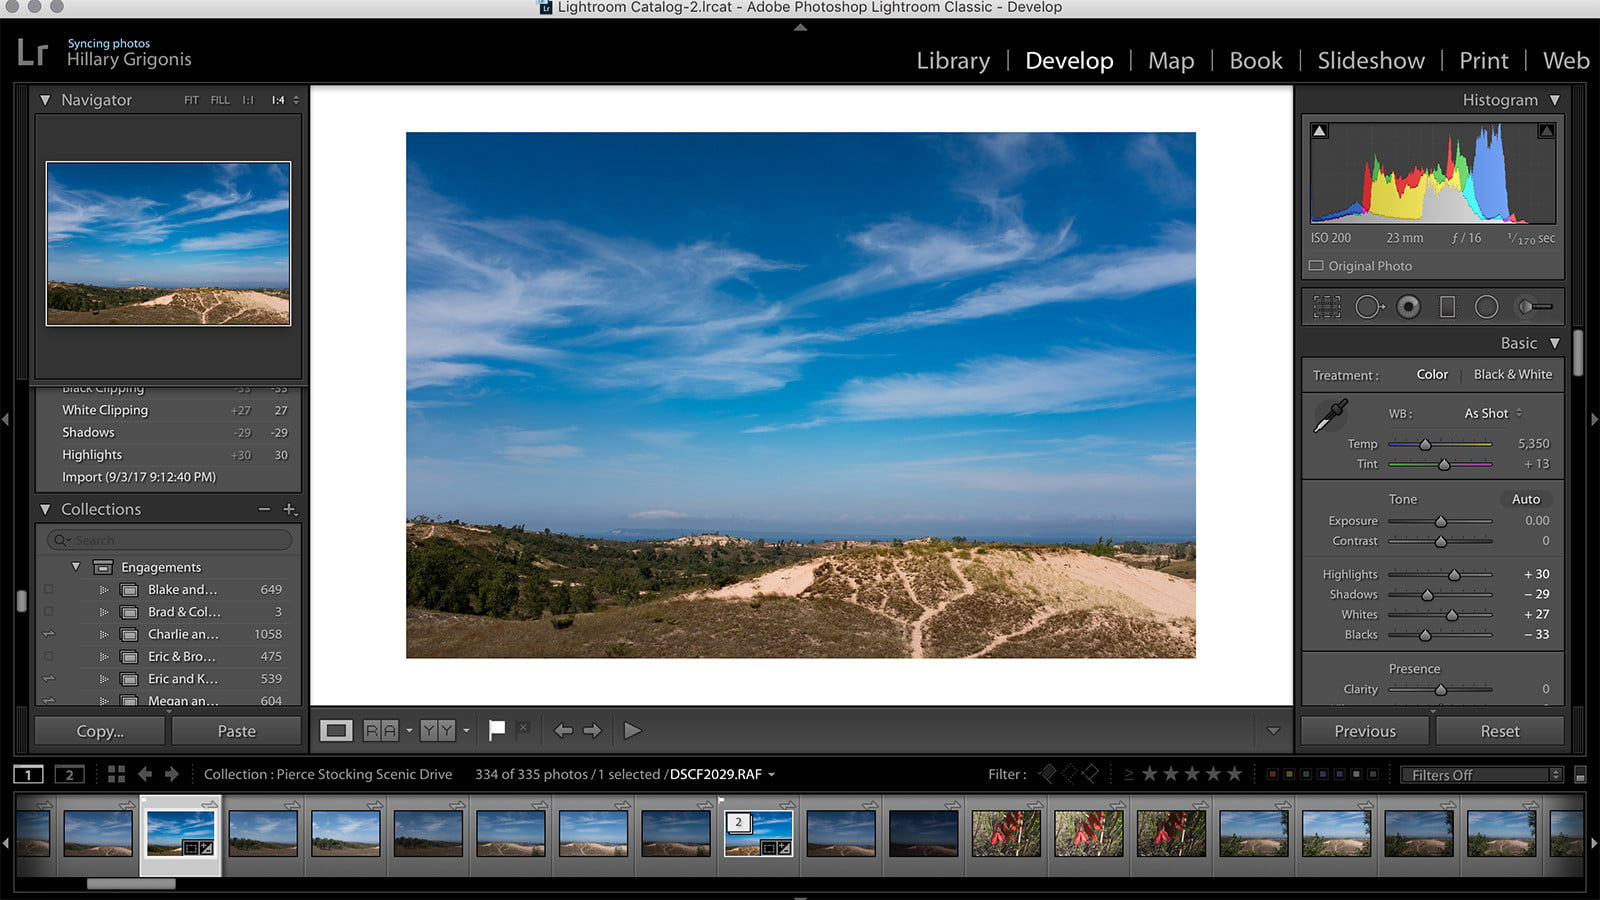 The Top 7 Features You’ll Love in Lightroom